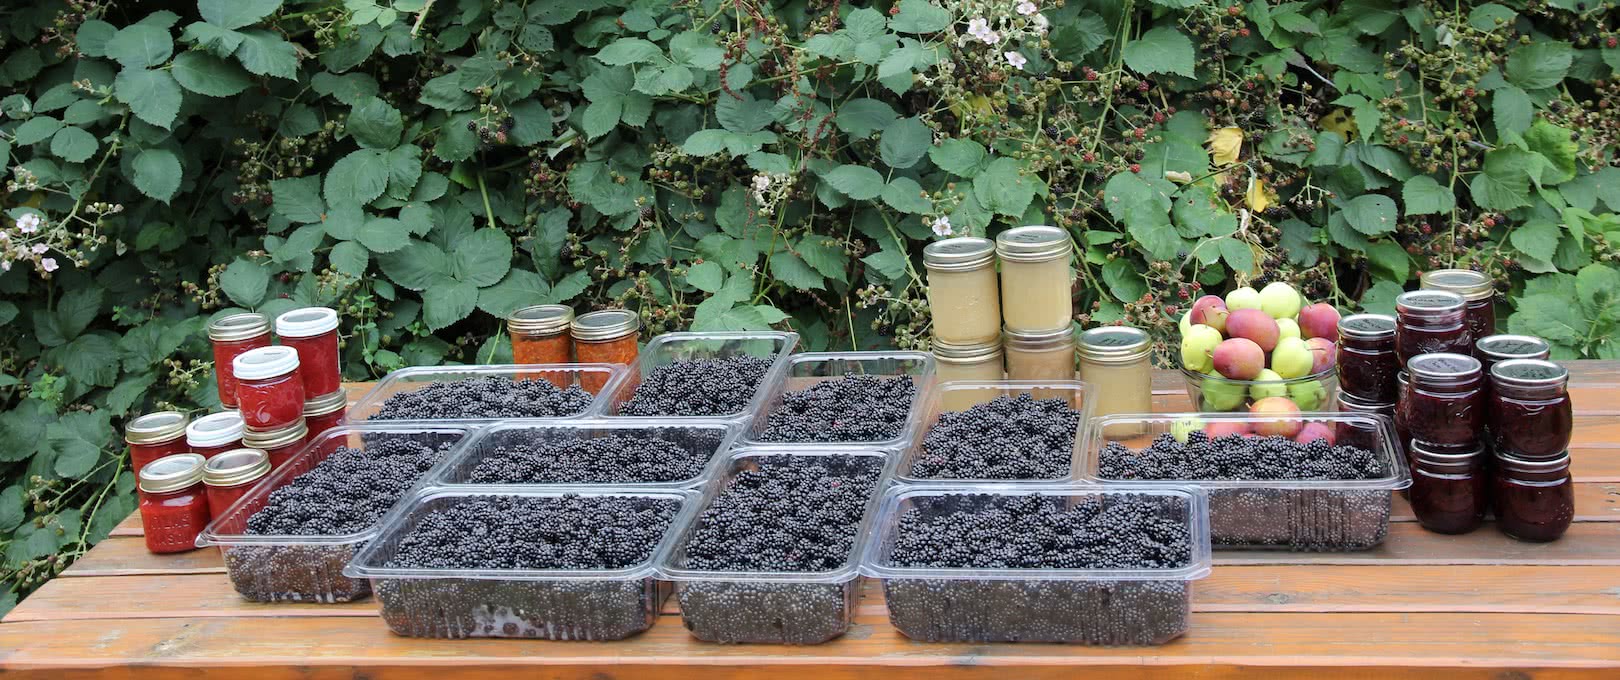 Blackberries and apples harvested from our Okeover launch site for use on our guided kayak tours